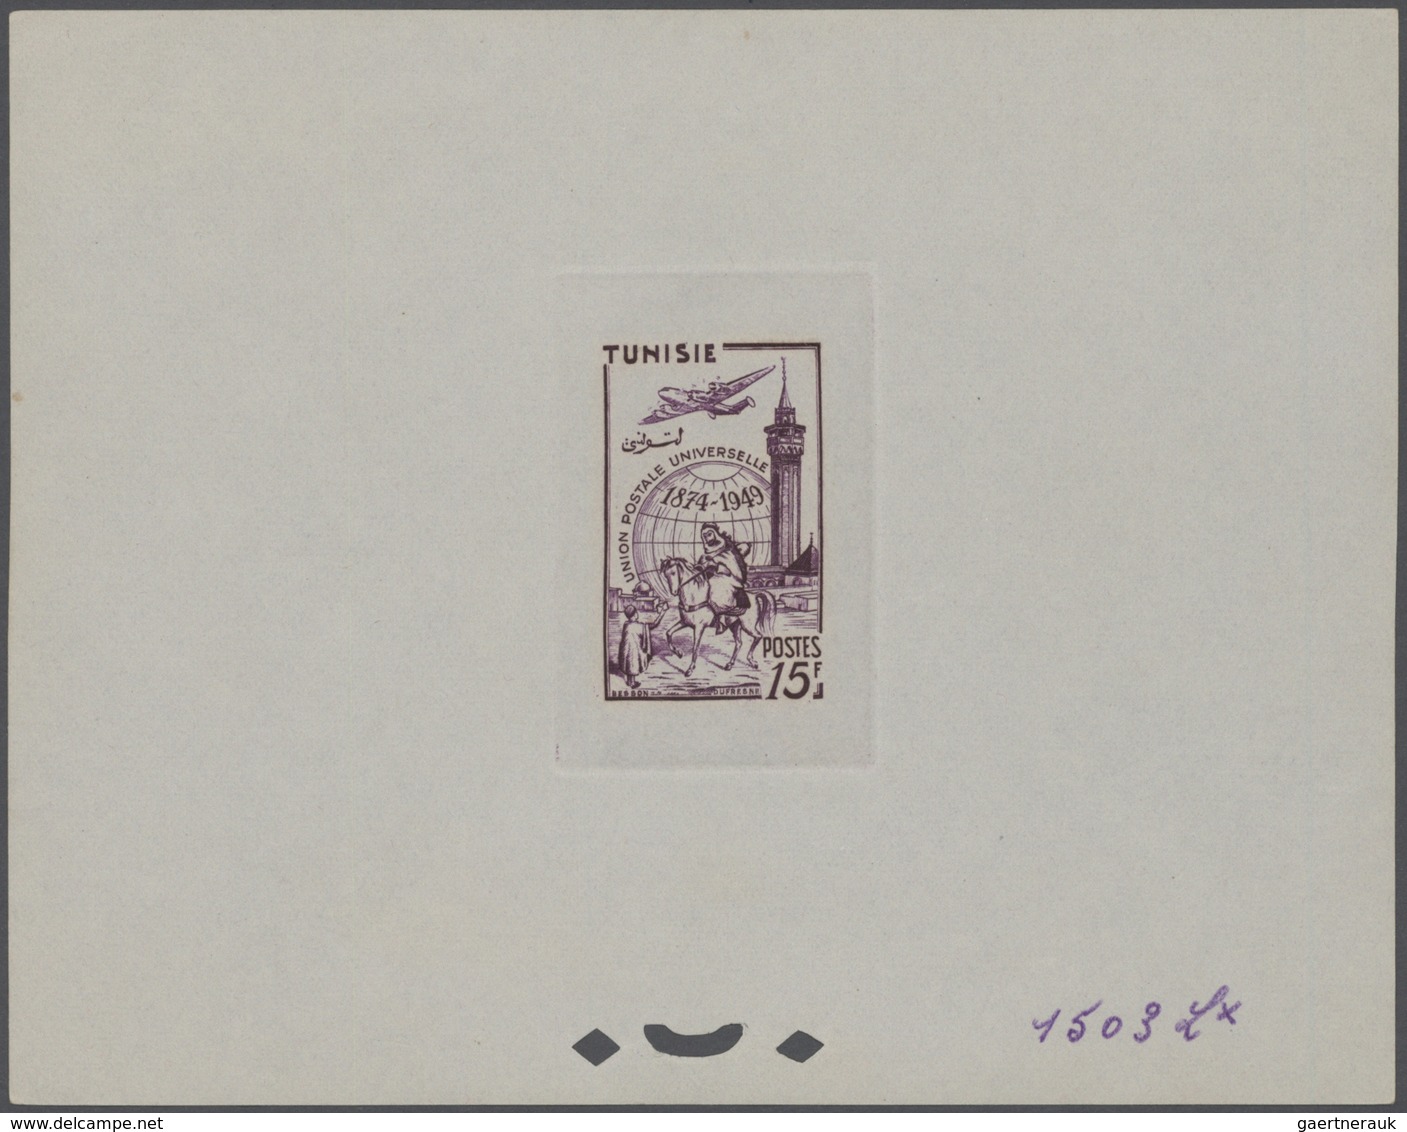 24587 Übersee: 1900/1970 (ca.), Northern Africa/Levant/Middle East, sophisticated balance in several album